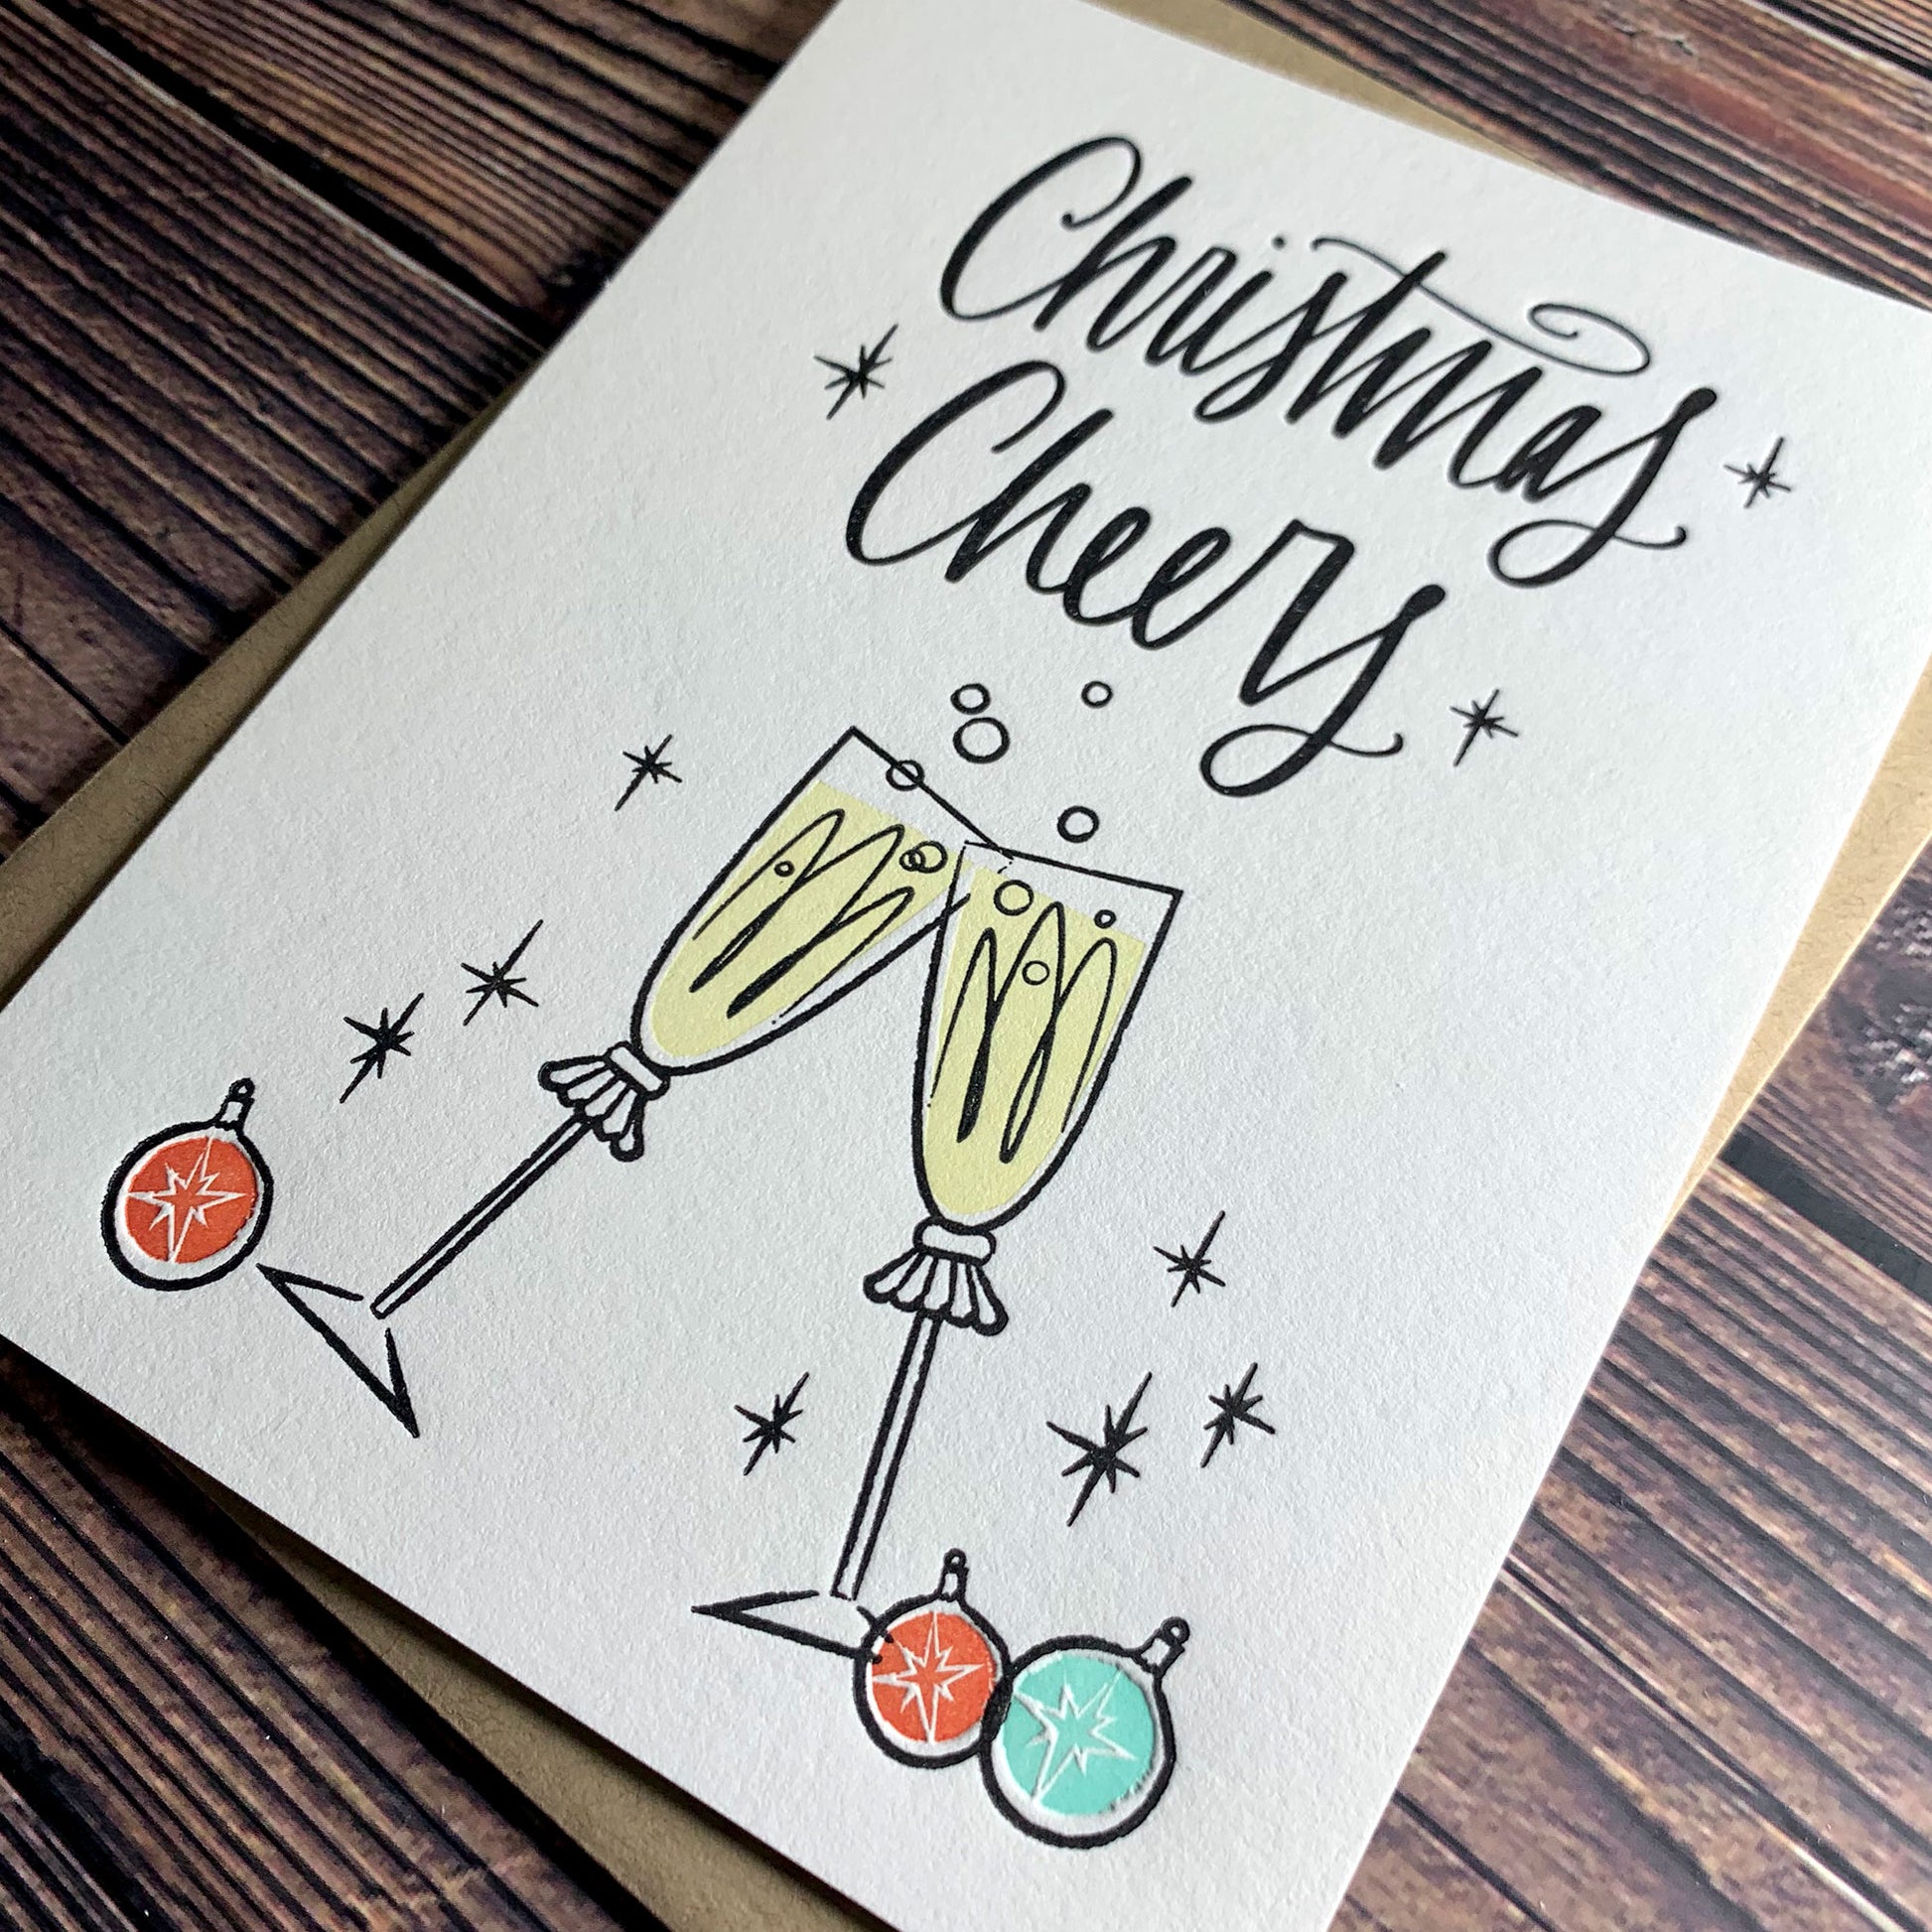 Christmas Cheers, Holiday Card, Letterpress printed, view shows letterpress impression, includes envelope